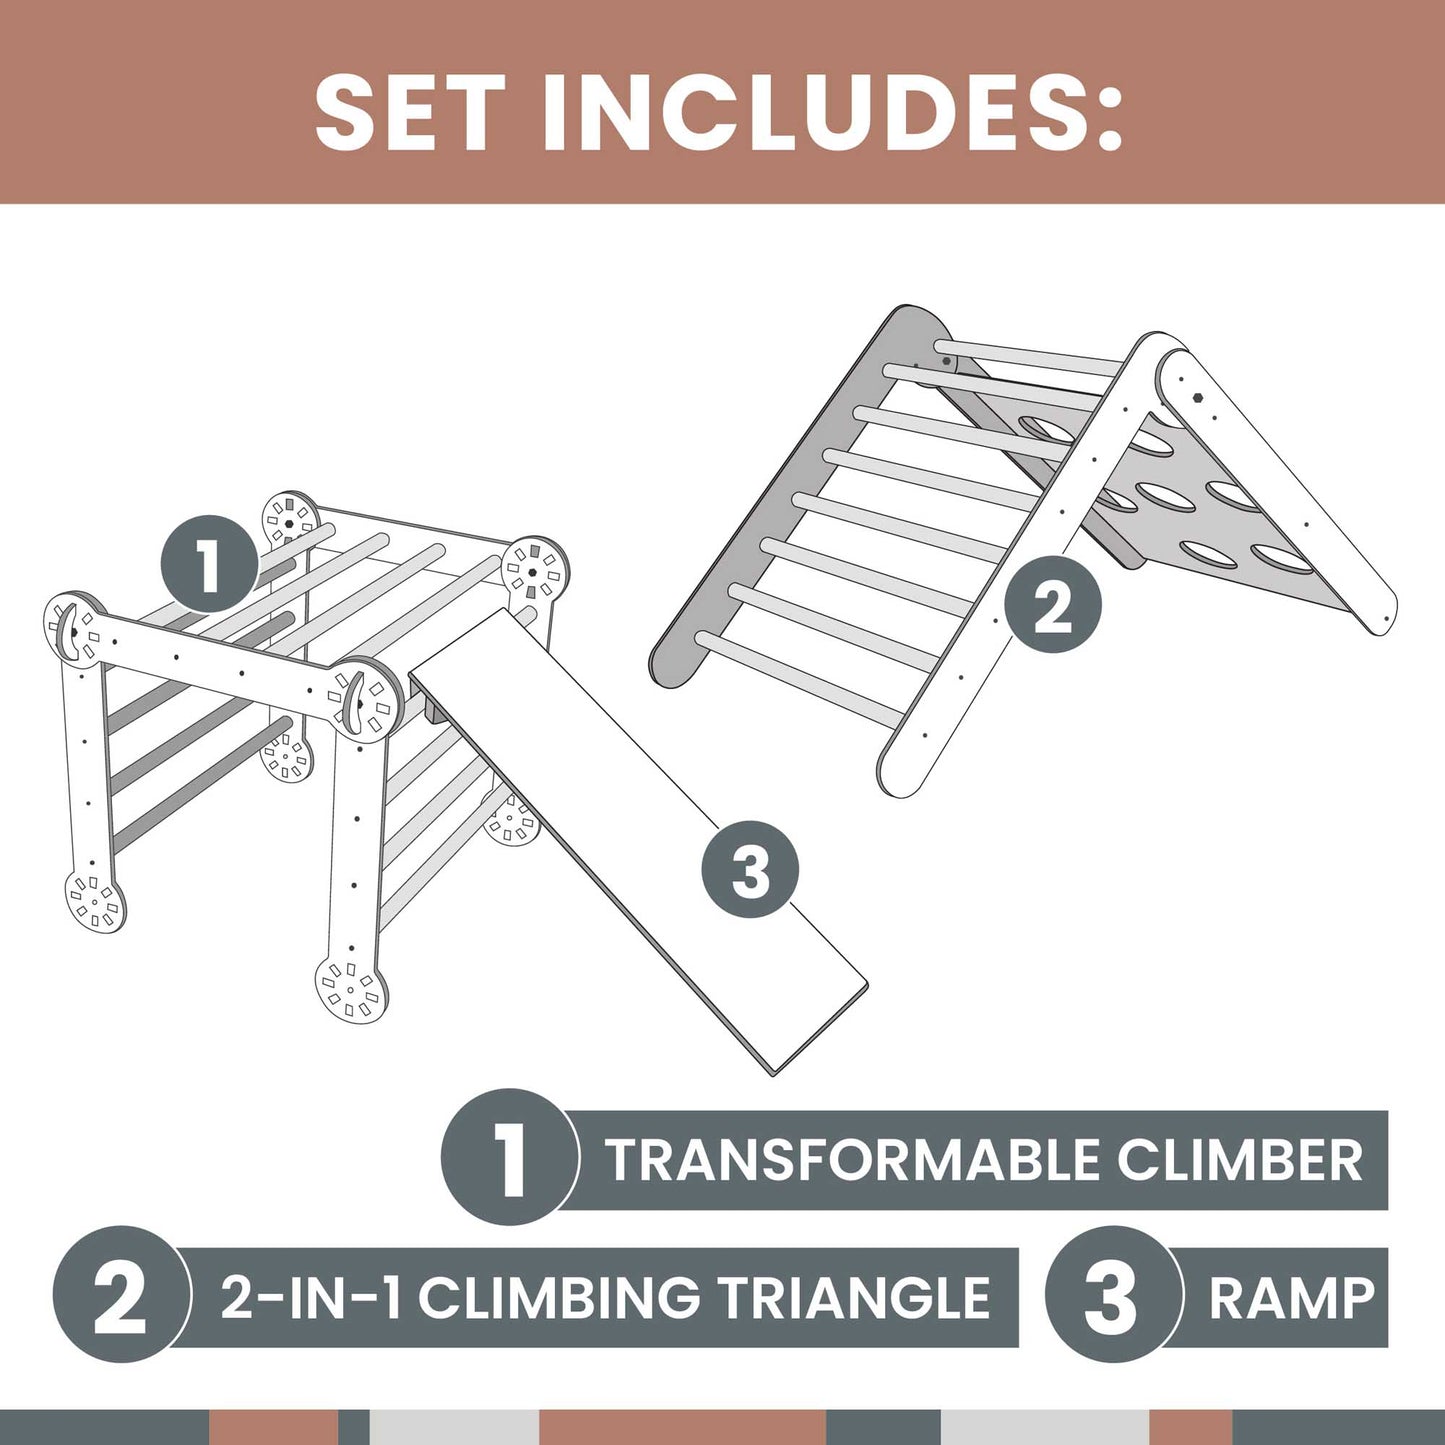 A set of instructions for building a Transformable climbing triangle + Transformable climbing gym + a ramp.